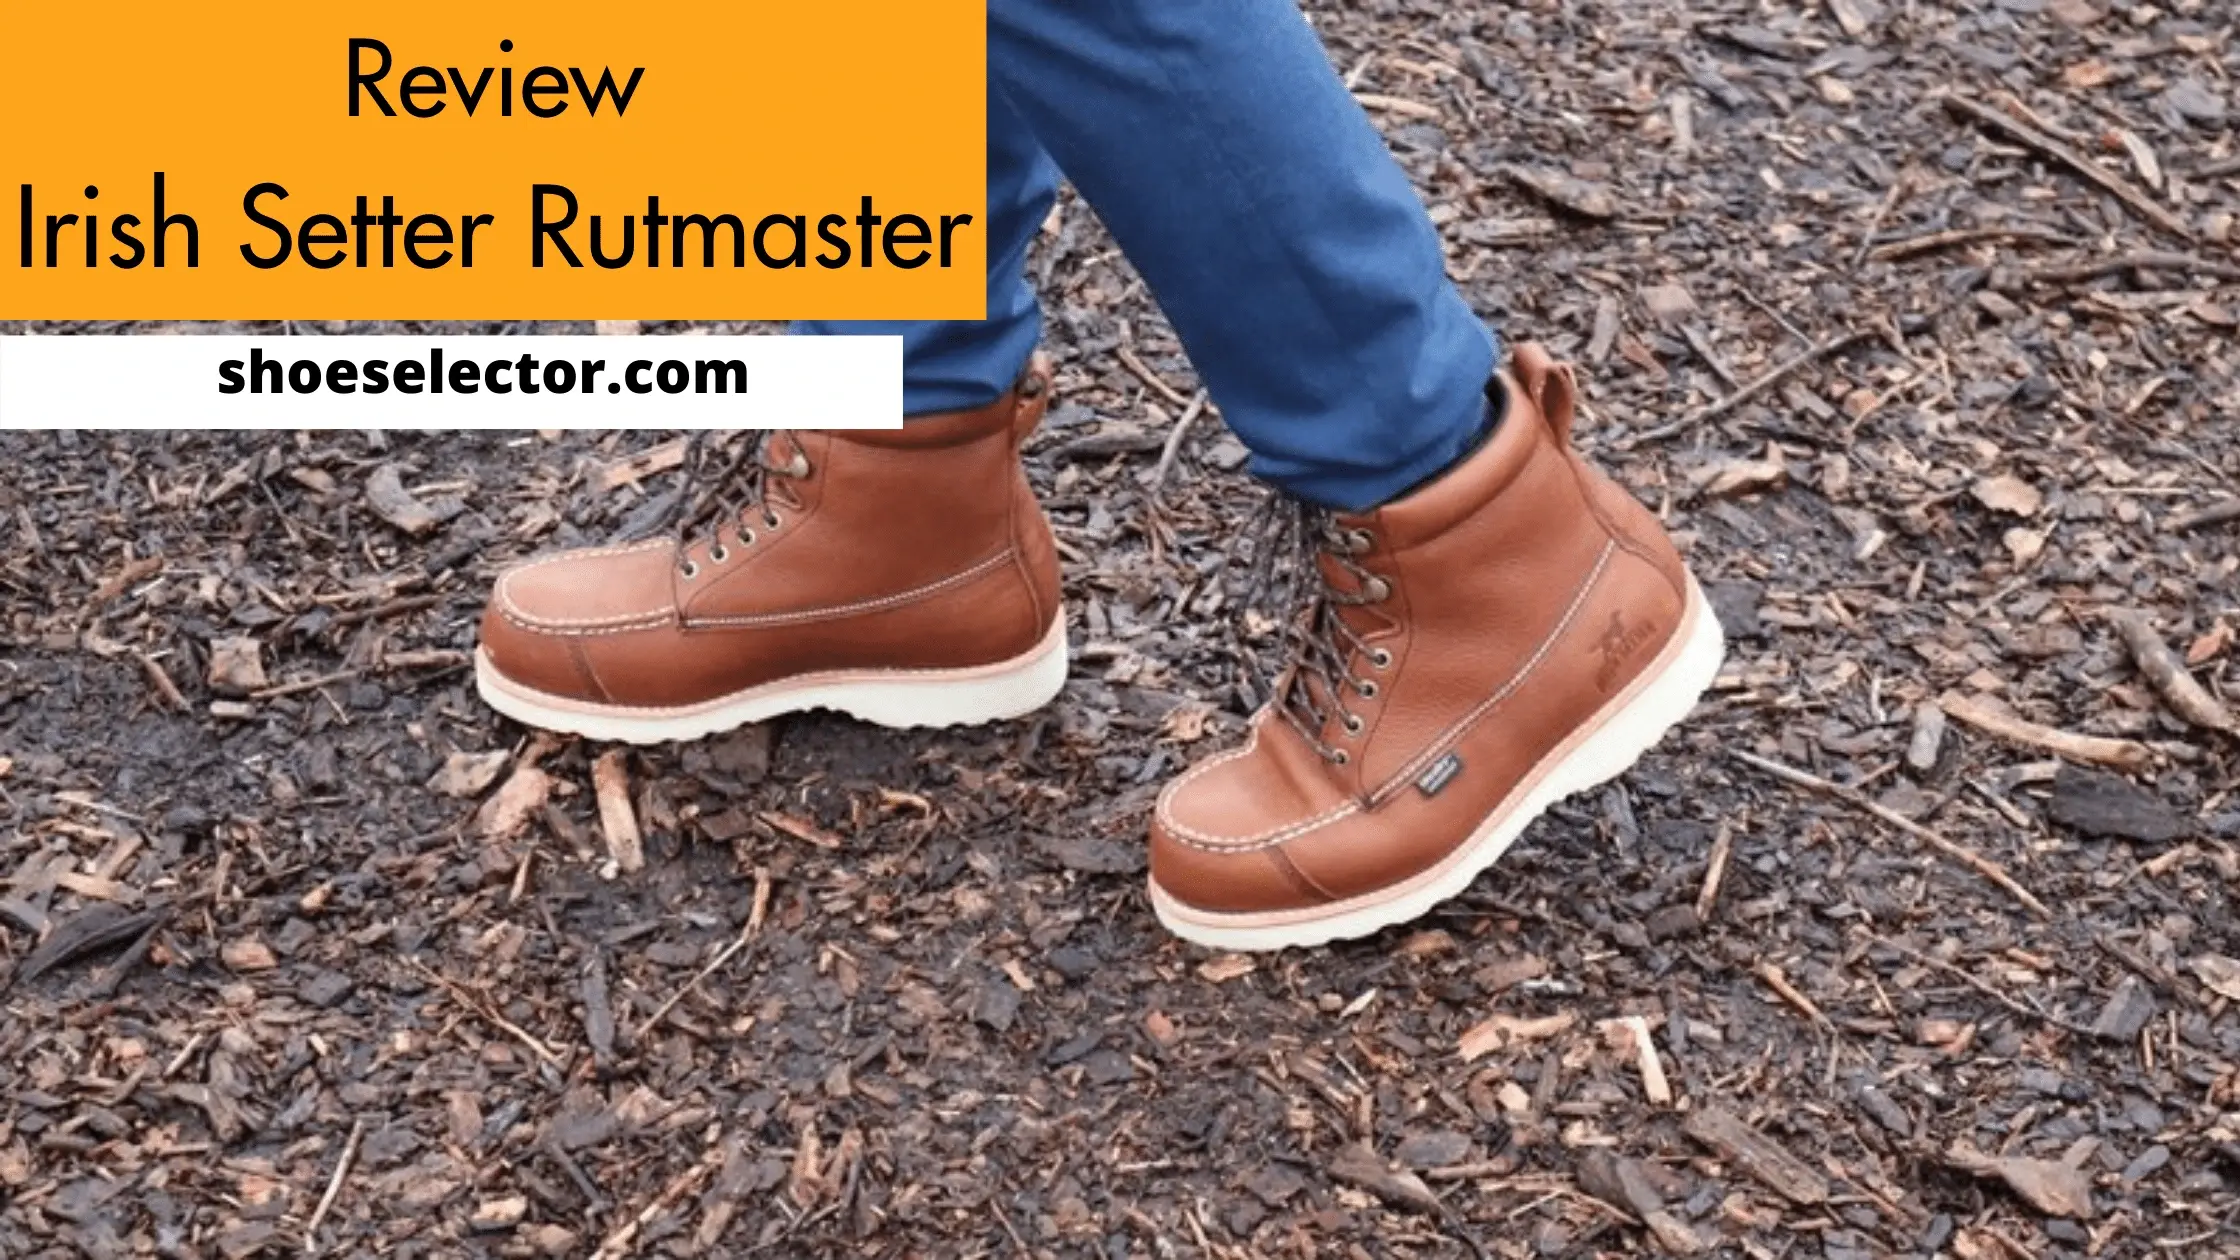 Irish Setter Rutmaster Review - Complete Guide